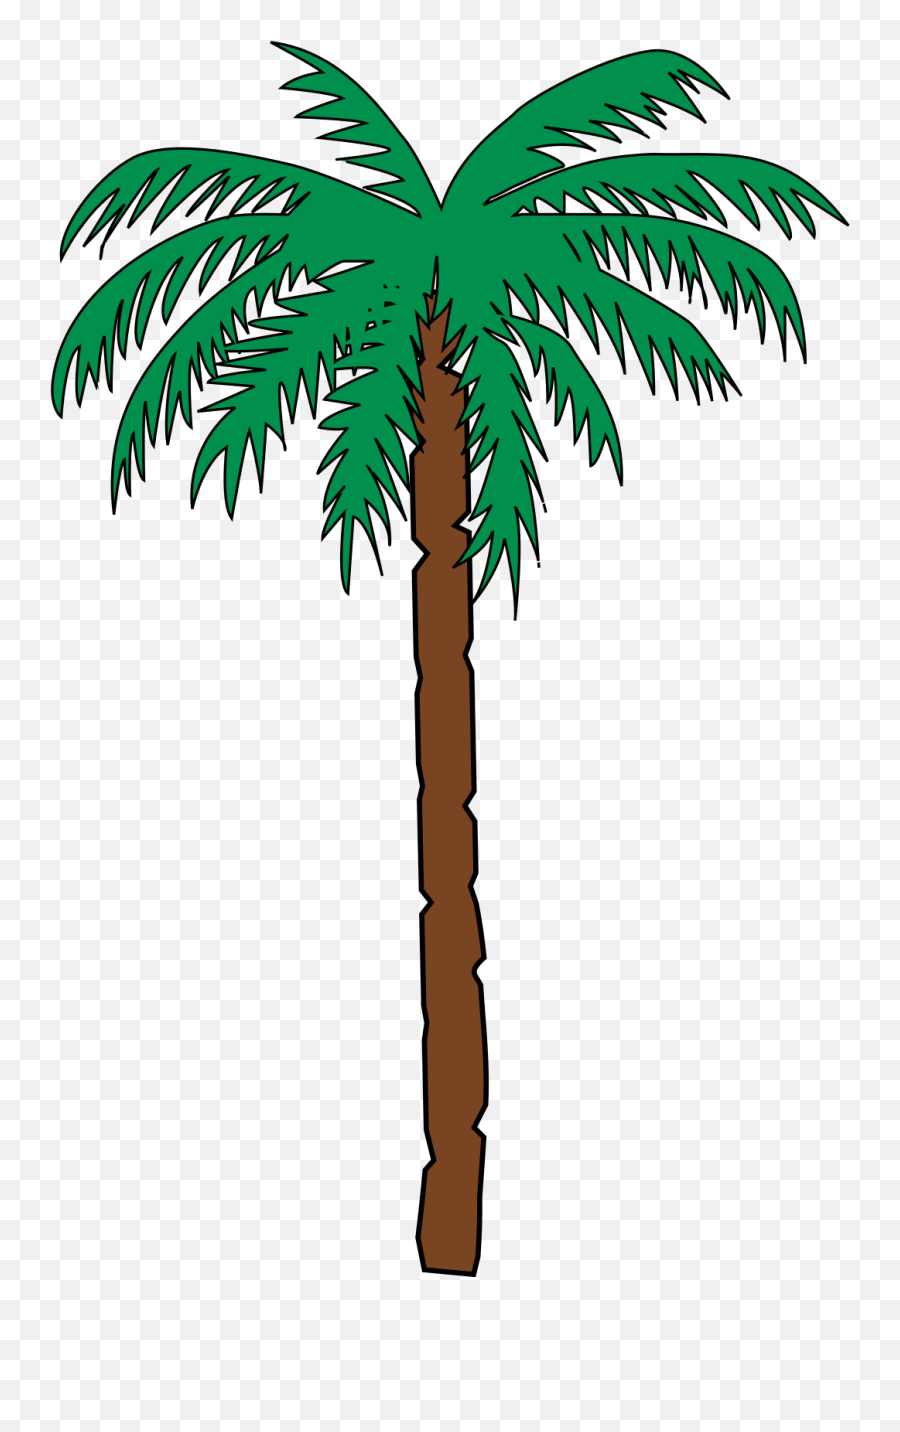 Palm Tree Date - Straight Palm Tree Cartoon Clipart Full Haiti Coat Of Arms Png,Cartoon Palm Tree Png